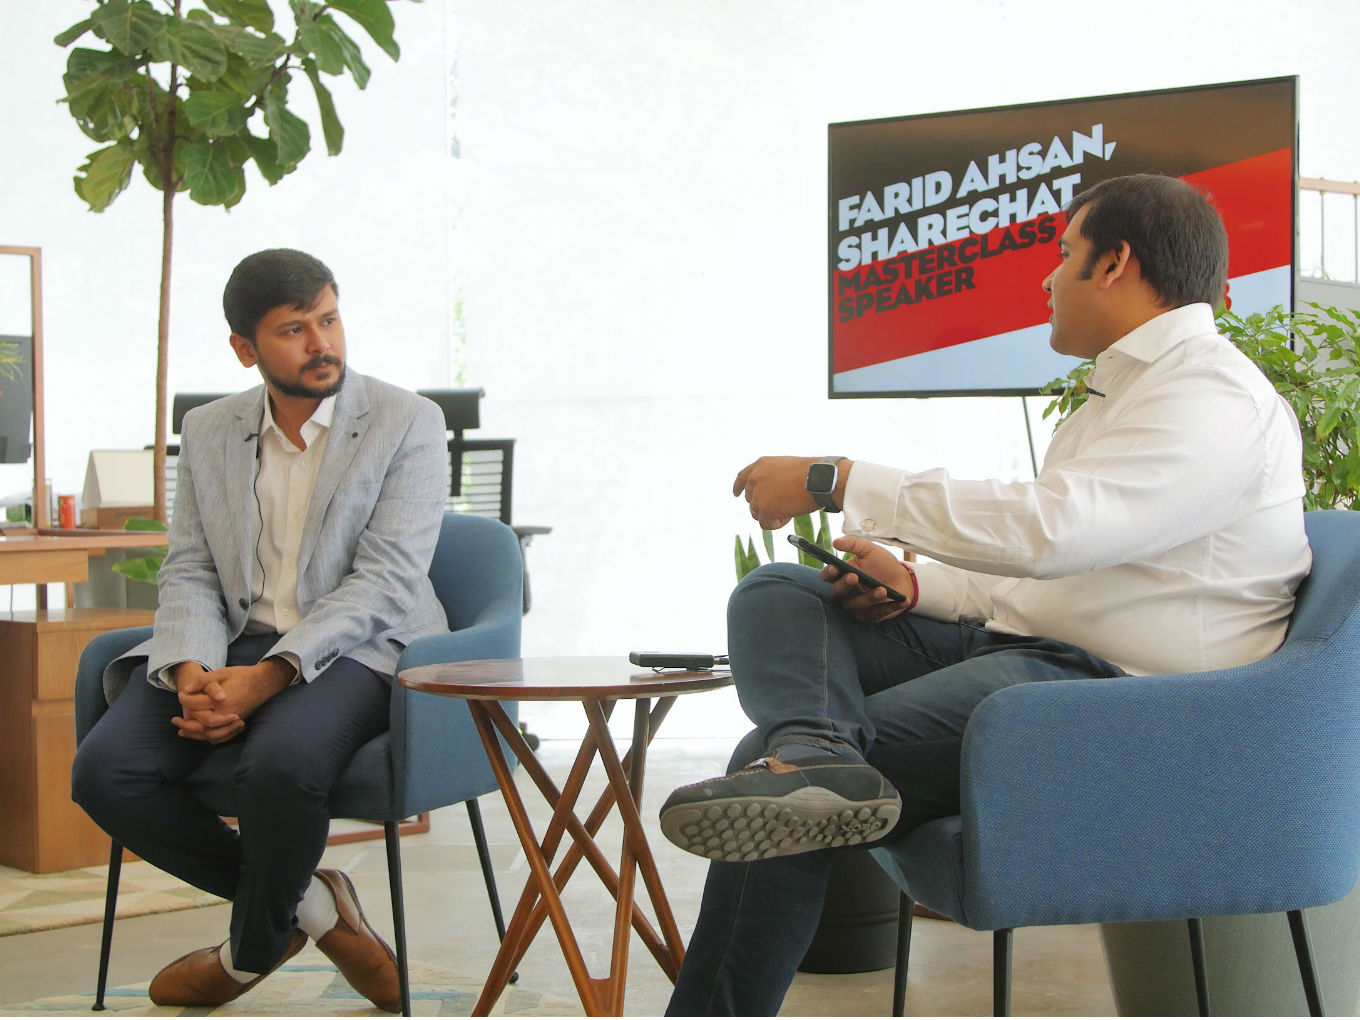 Sharechat’s Farid Ahsan on “Zero to One” for India’s most inclusive social network